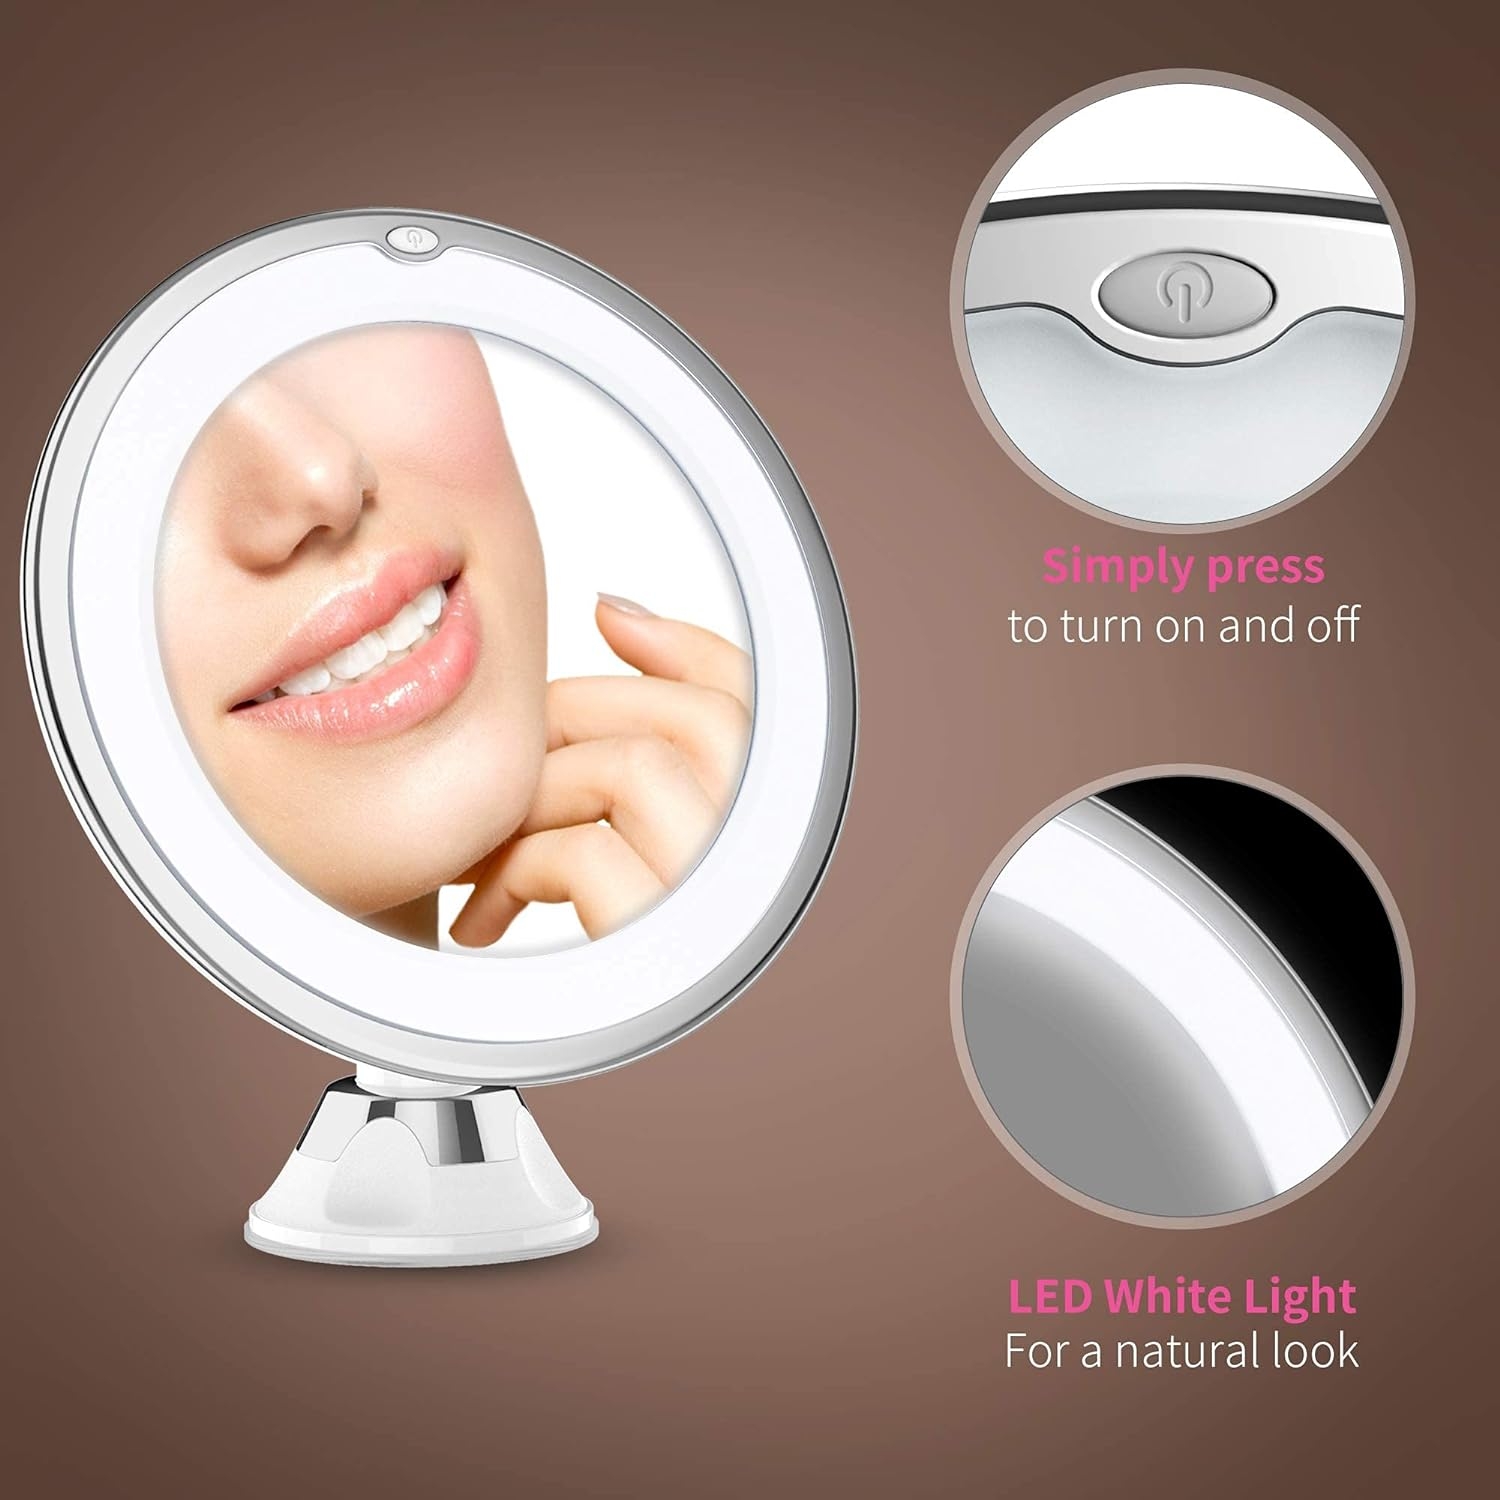 Updated 2021 Version 10X Magnifying Makeup Vanity Mirror with Lights, LED Lighted Portable Hand Cosmetic Magnification Light up Mirrors for Home Tabletop Bathroom Shower Travel